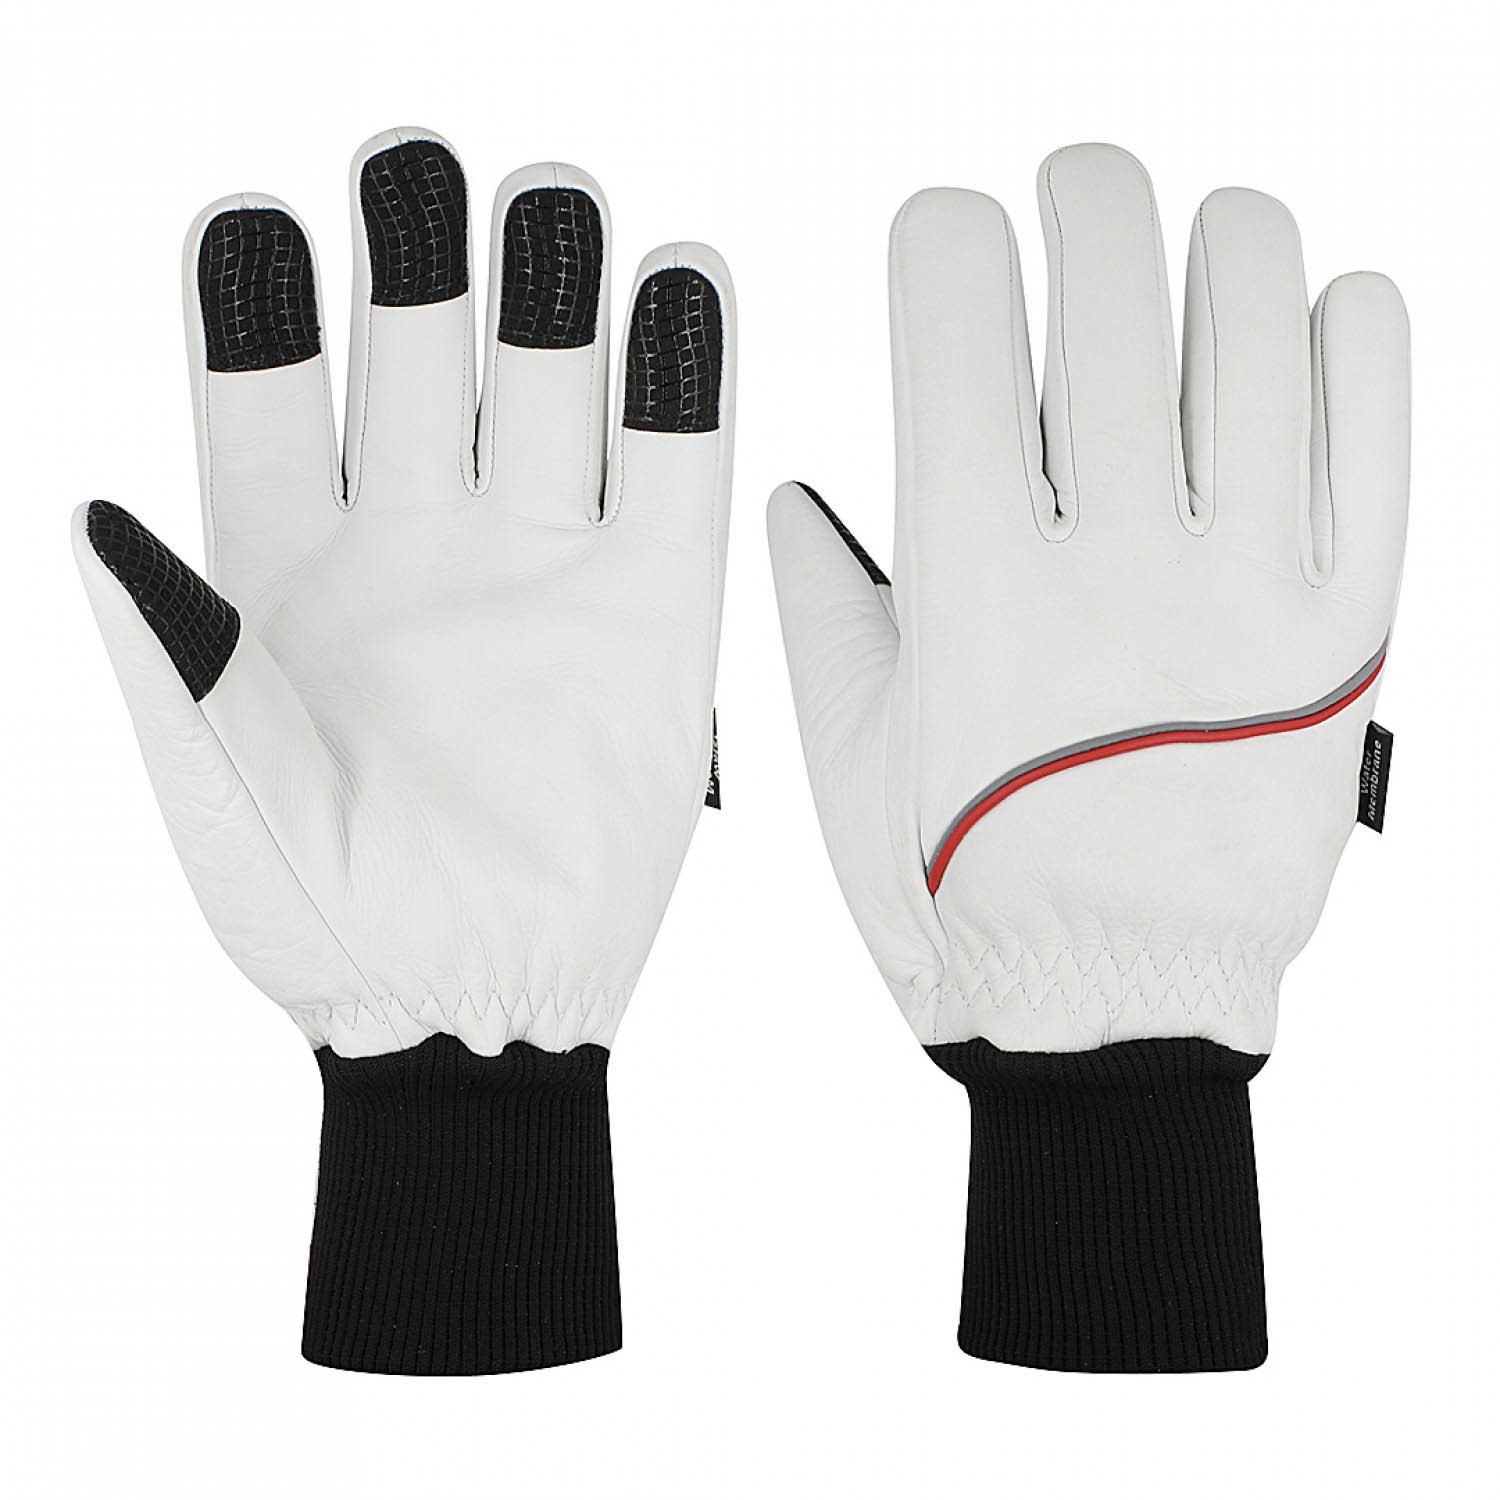 Insulated Freezer Gloves